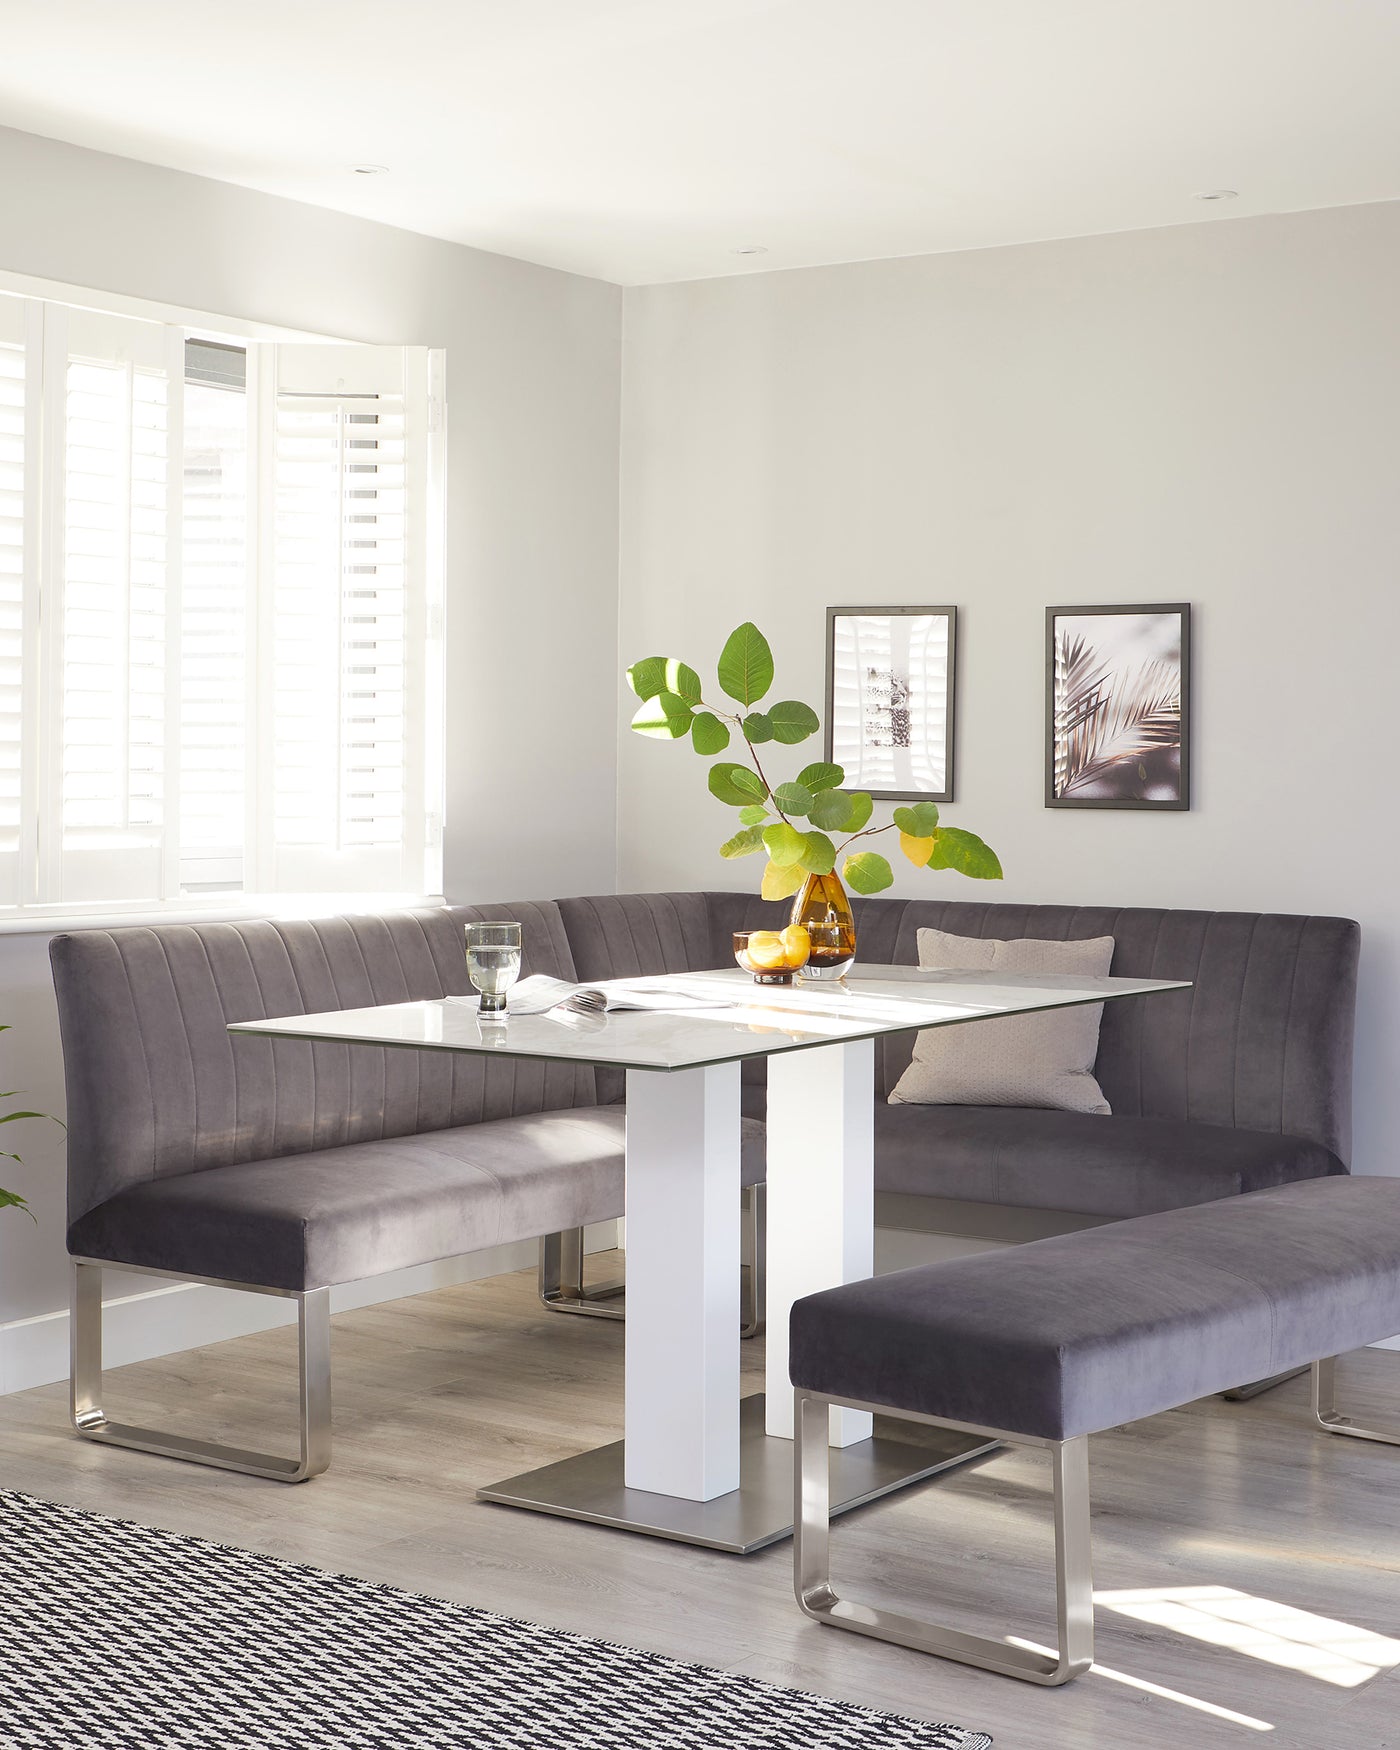 Modern dining room furniture consisting of a rectangular white table with a glossy finish and sleek metal legs, complemented by an L-shaped bench and a separate bench both upholstered in plush, grey fabric. The design features clean lines and a contemporary aesthetic.